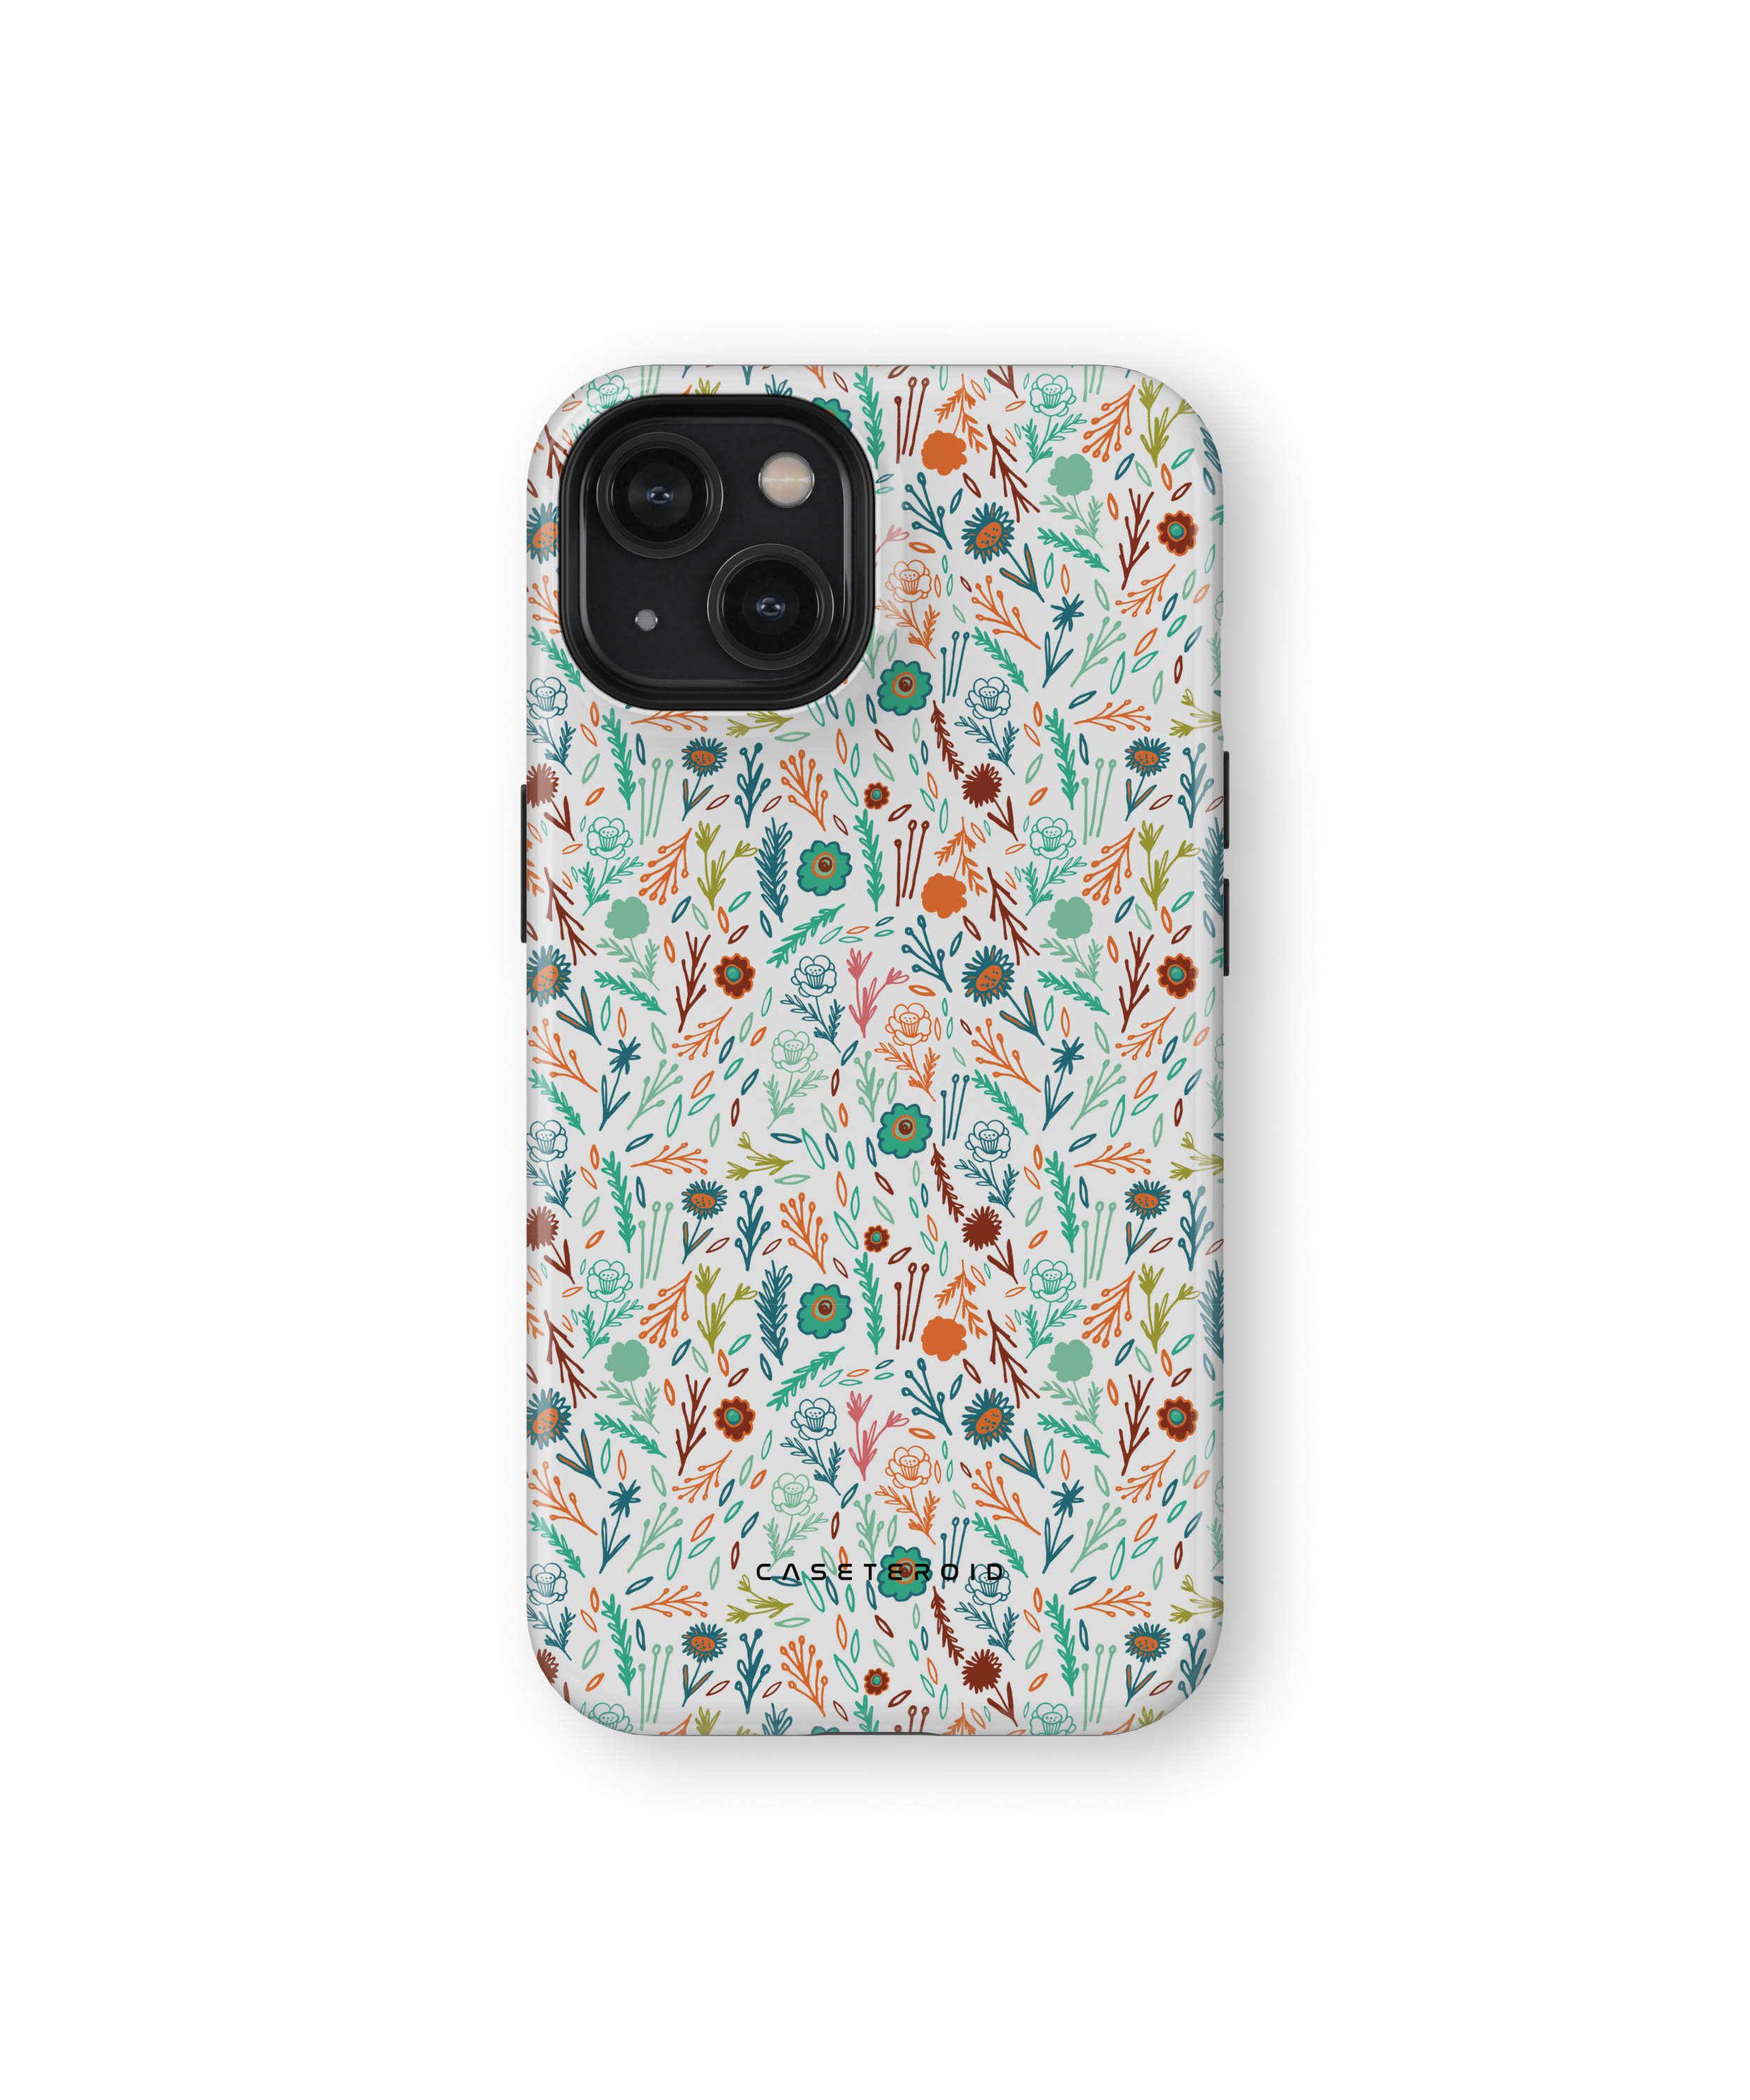 iPhone Tough Case - Nature's Tapestry - CASETEROID